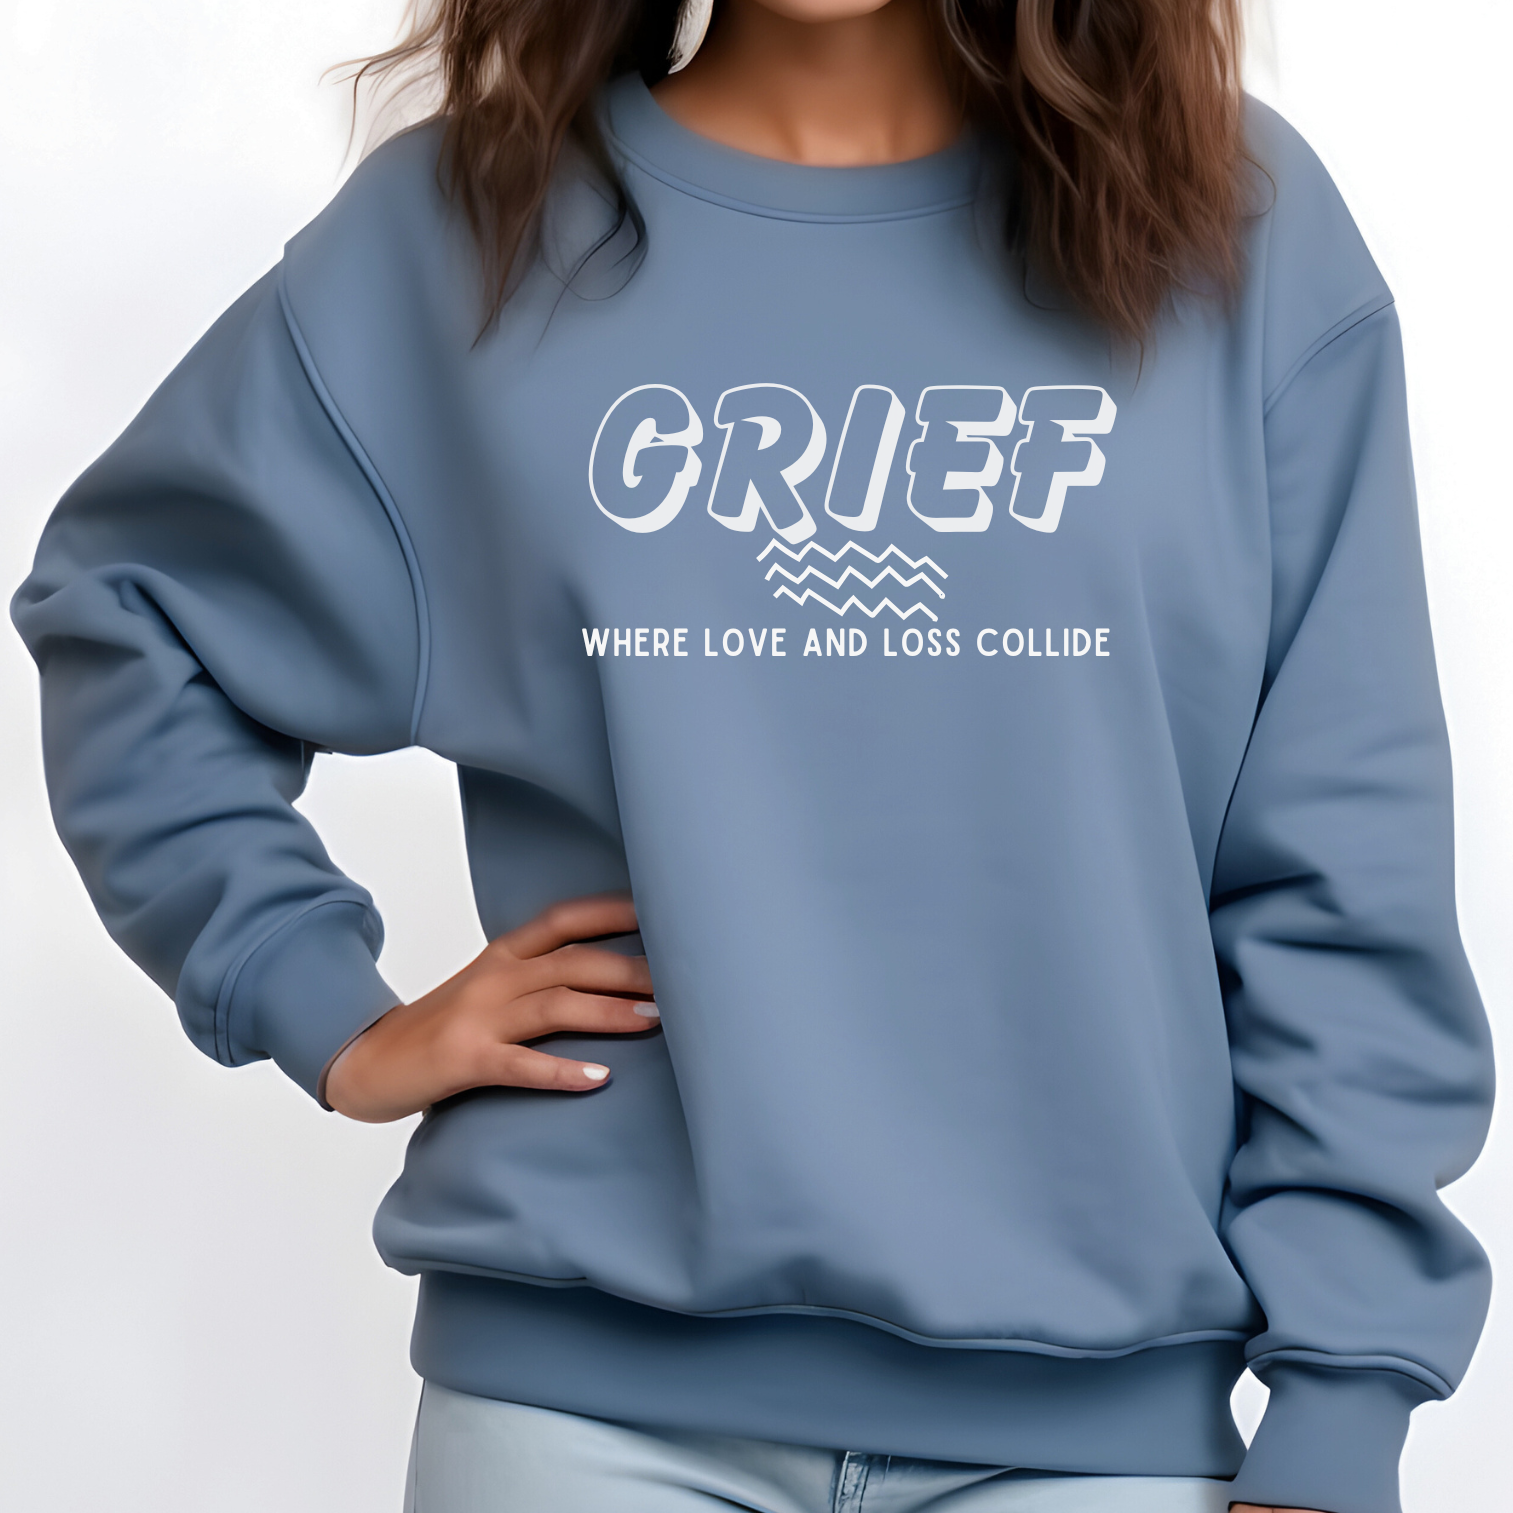 Blue Jean Comfort Colors Sweatshirt.  Sometimes you need to wear your heart on your sleeve, and let the world know you are grieving. 